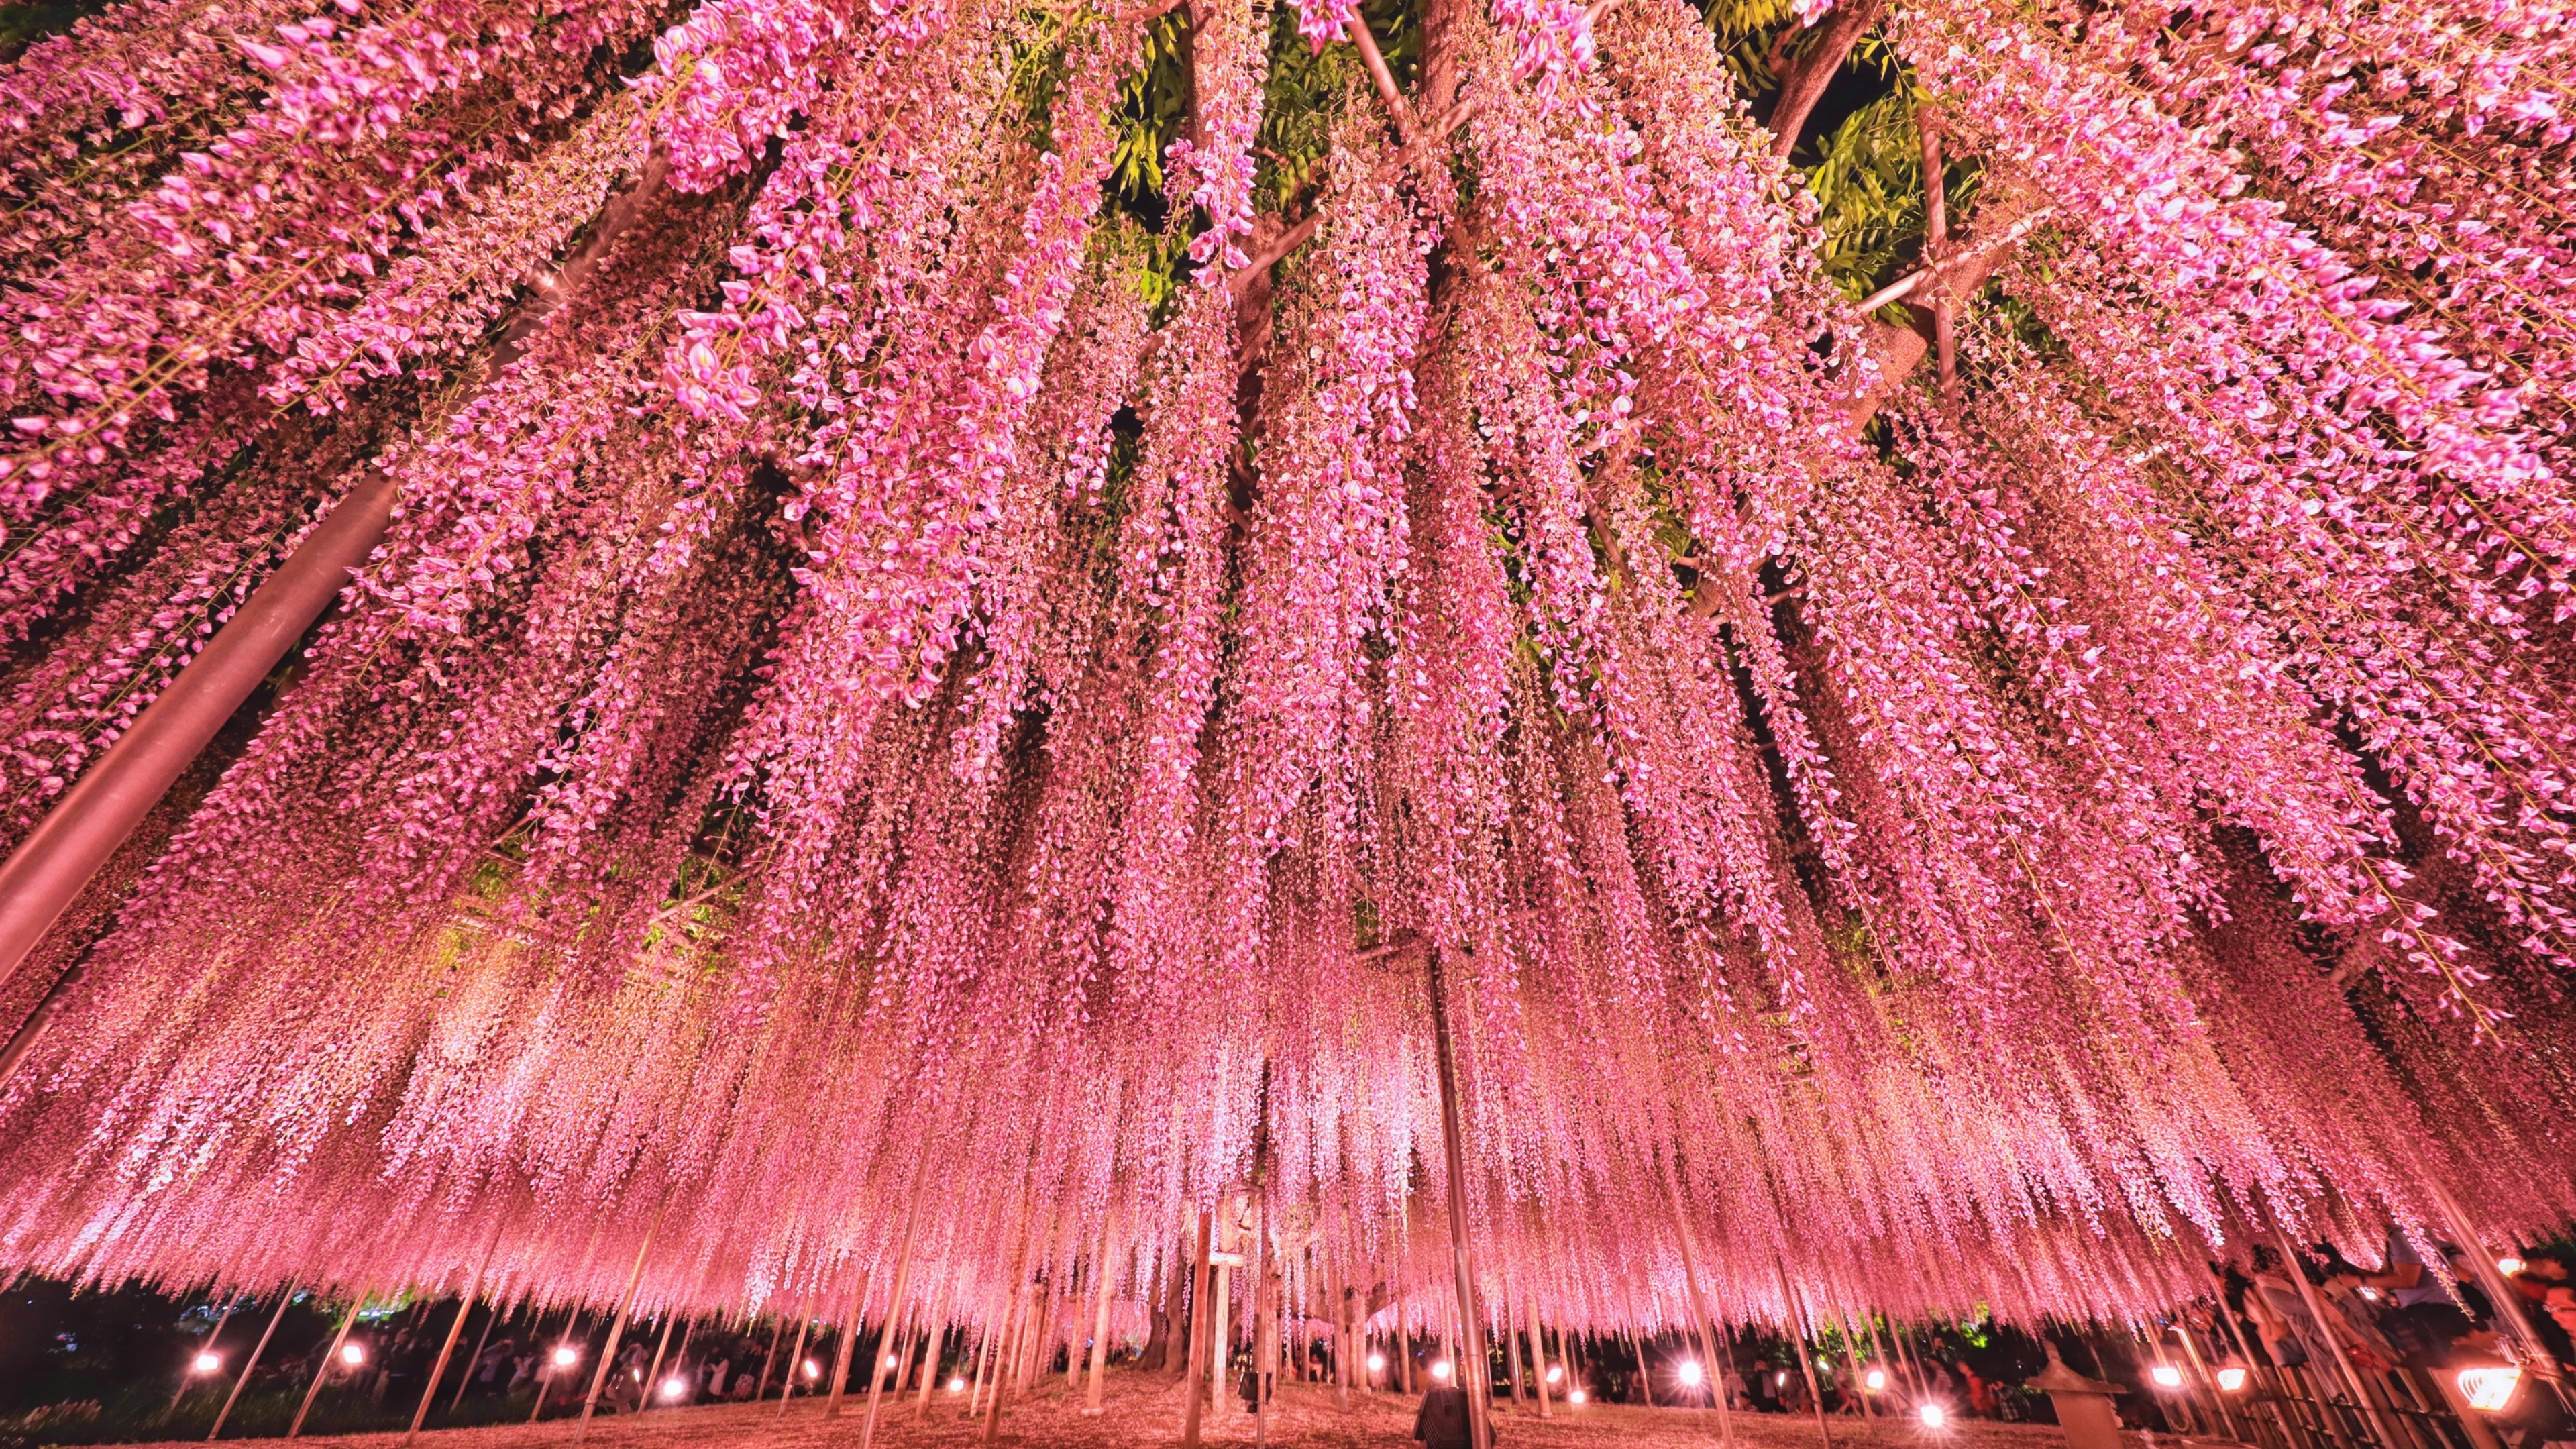 Download 3840x2160 Japan Tokyo, Wisteria Festival, Pink Tree Wallpaper for UHD TV